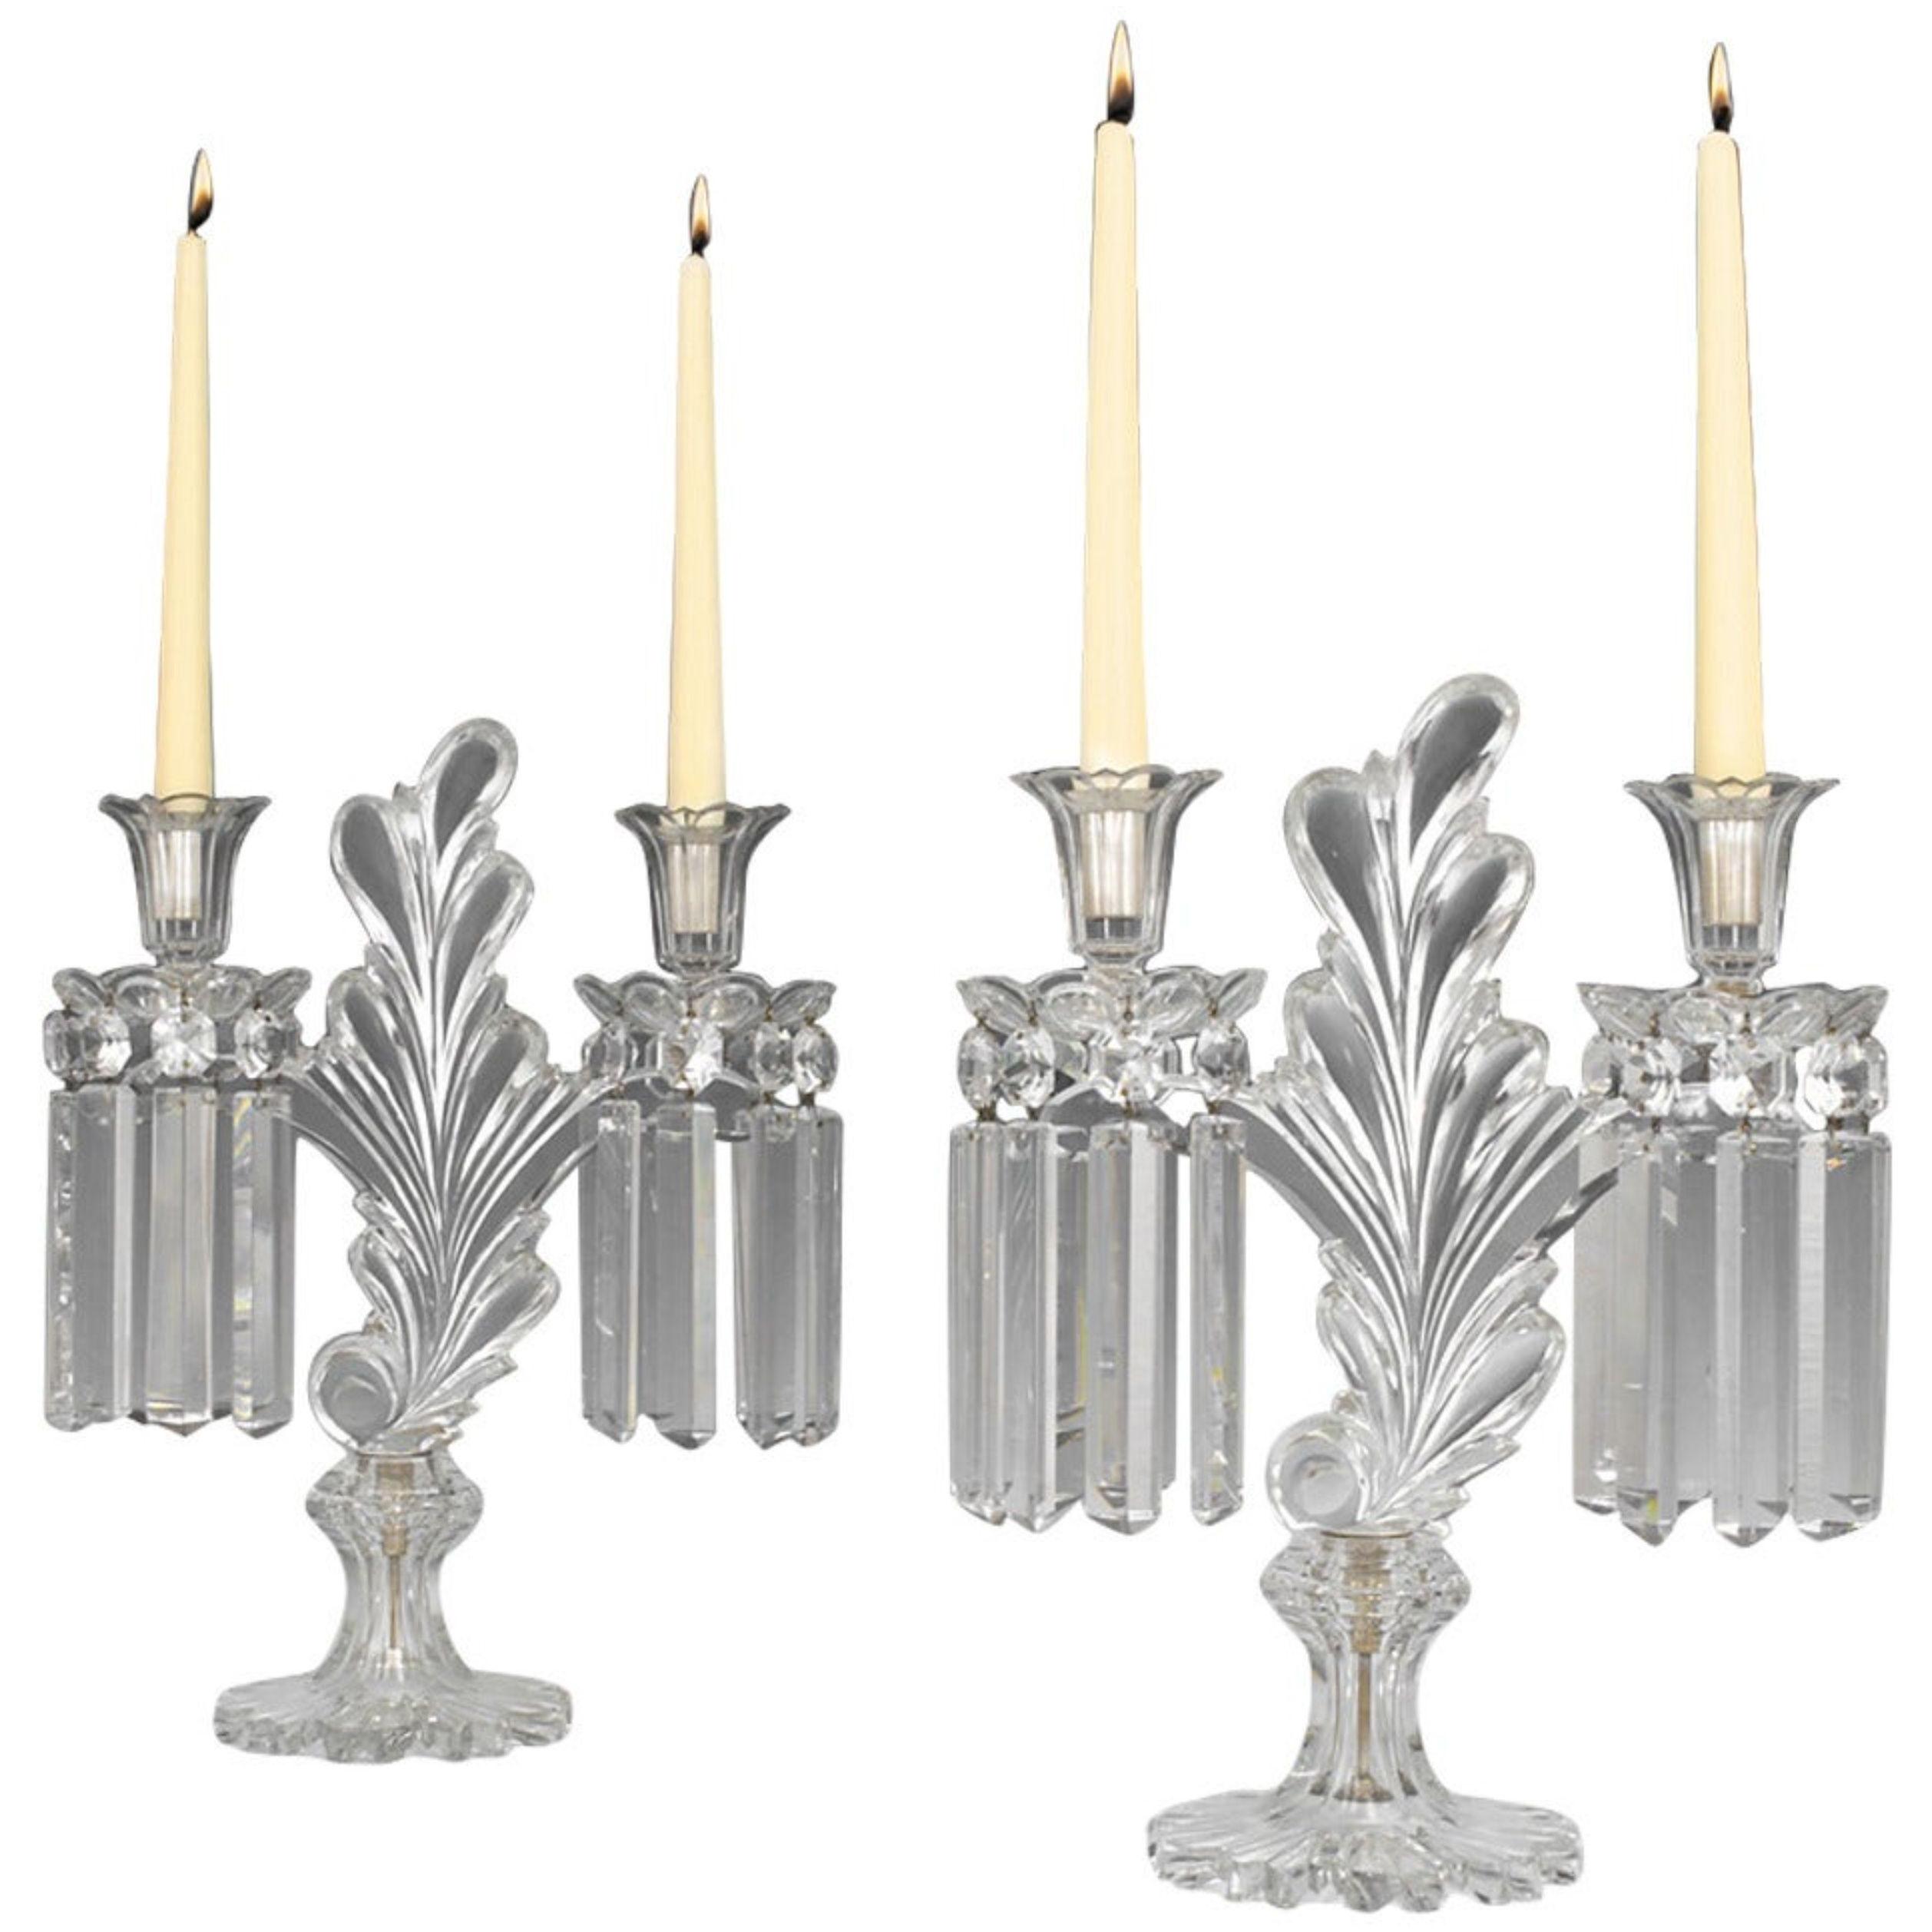 Superb Quality Pair of Early Victorian Cut Glass Candelabra	